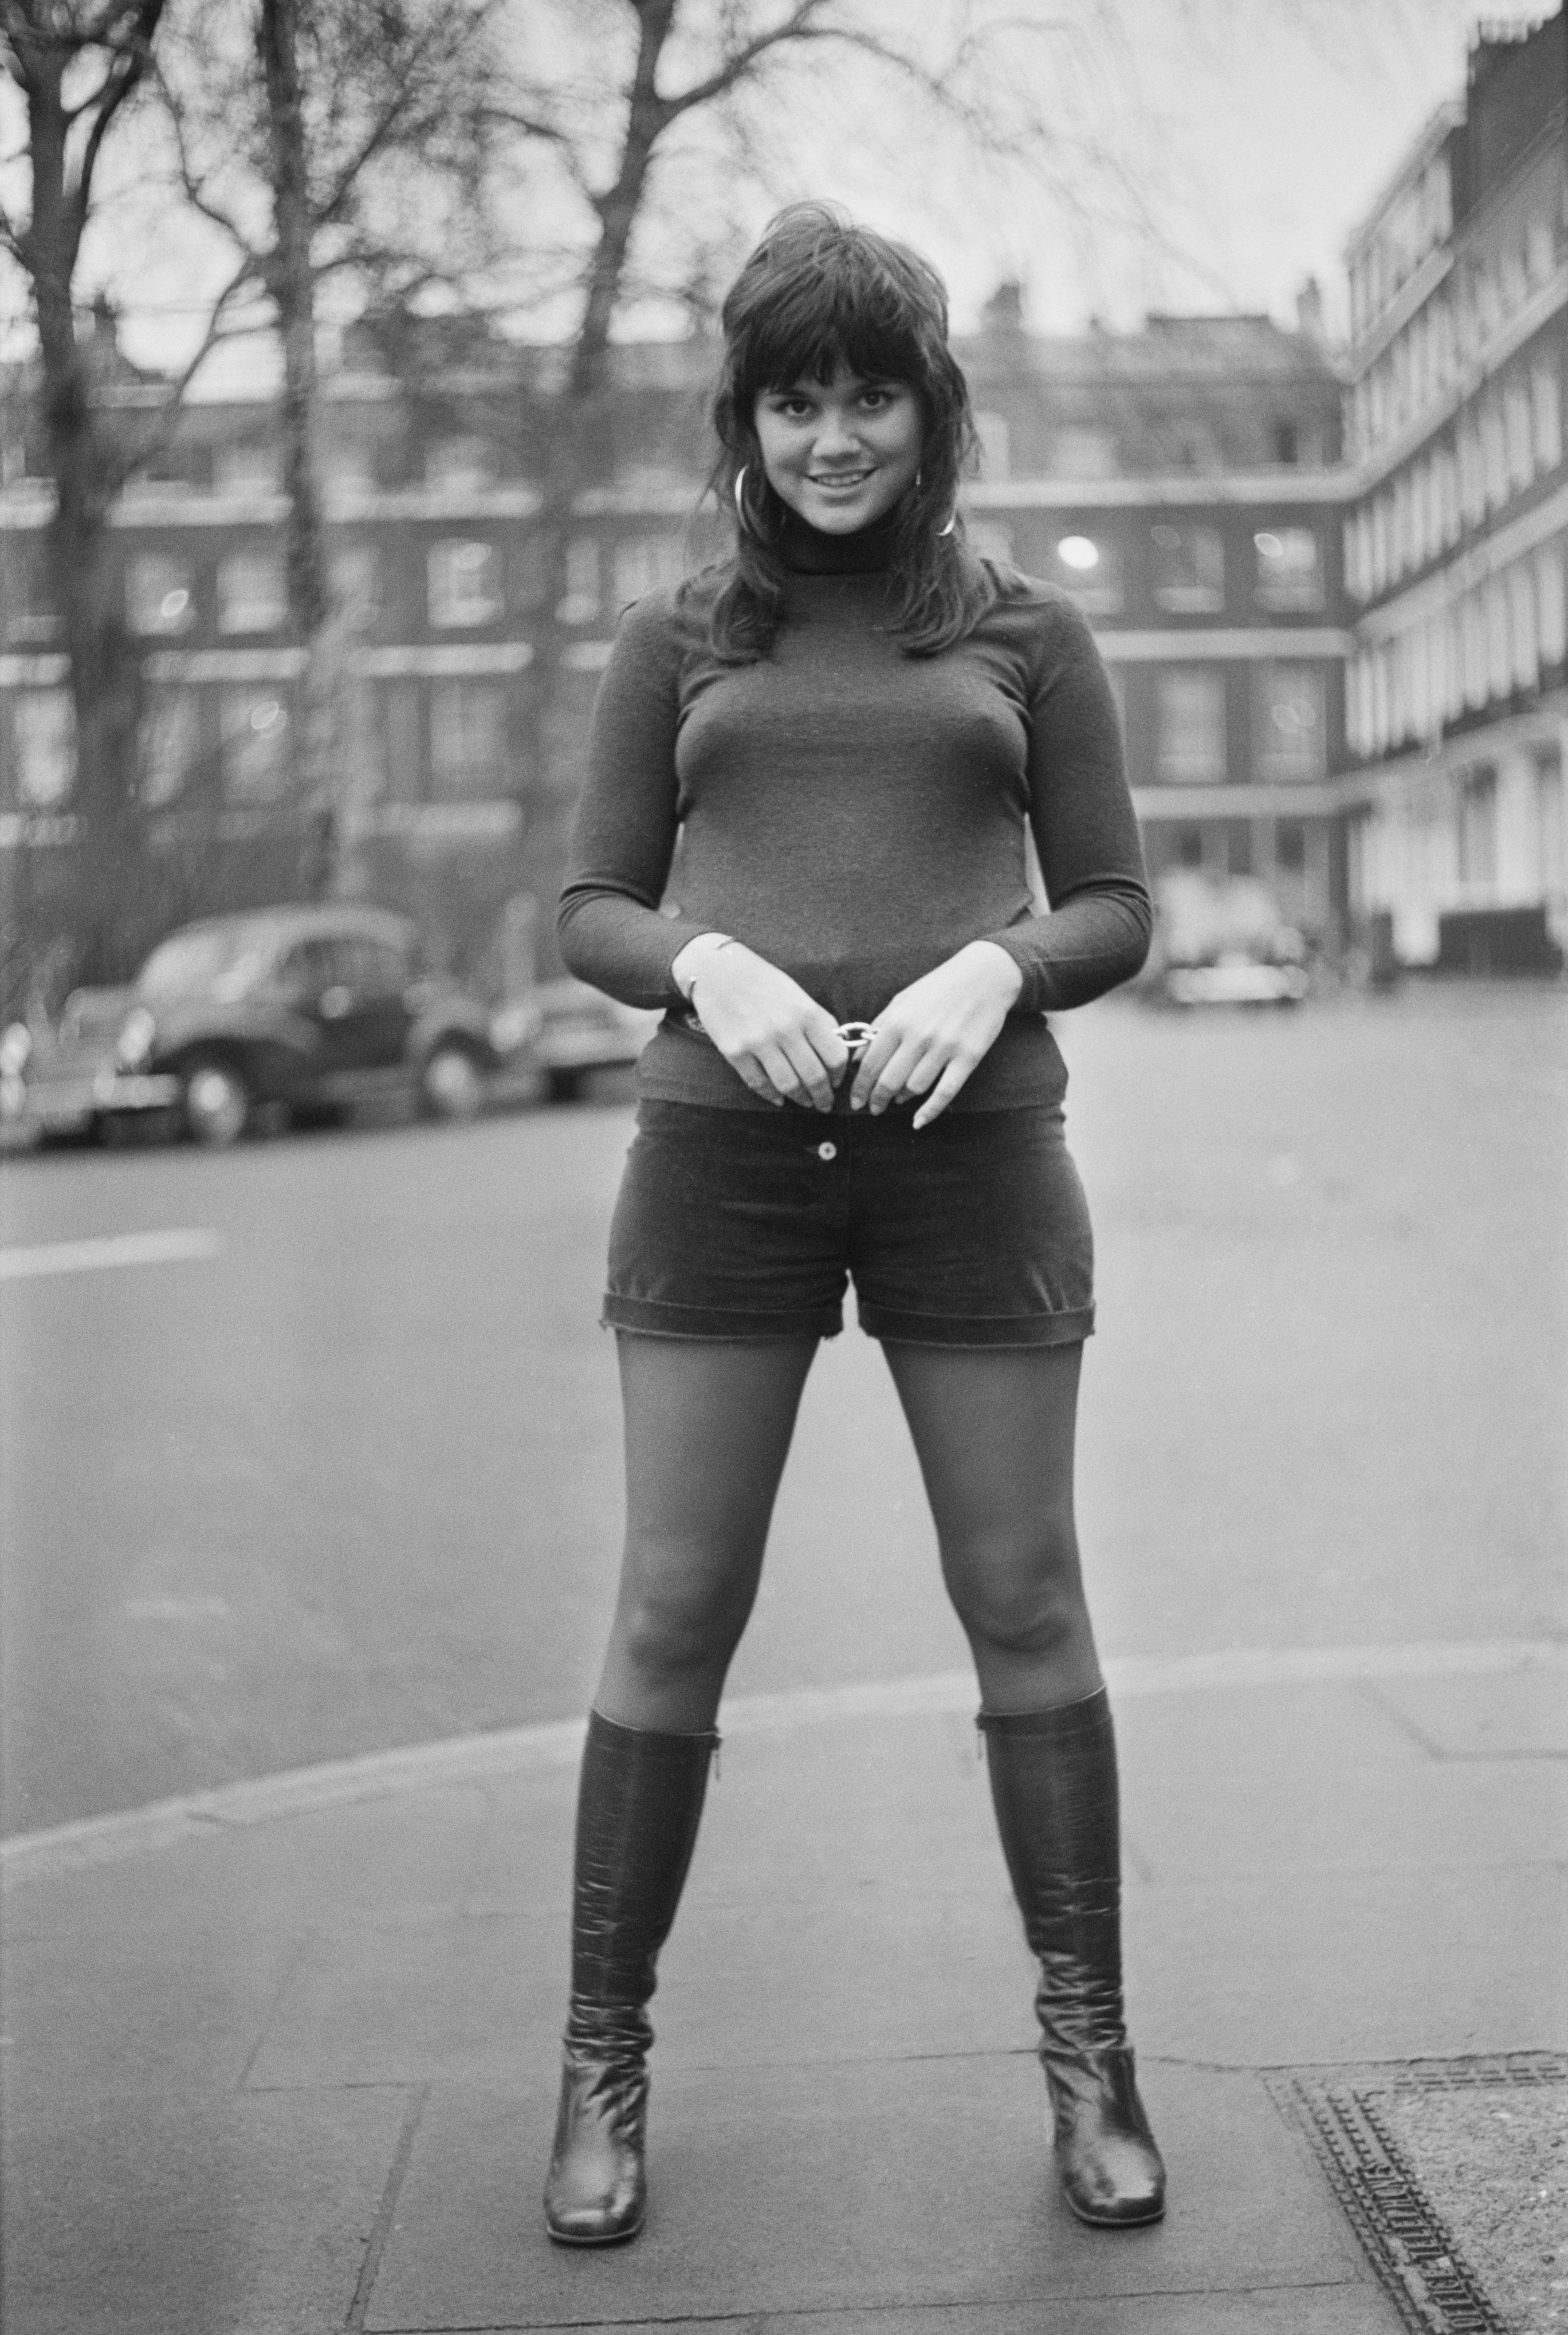 Linda Ronstadt photographed wearing boots, short pants and a top on January 26, 1971 in London, United Kingdom.┃Source: Getty Images